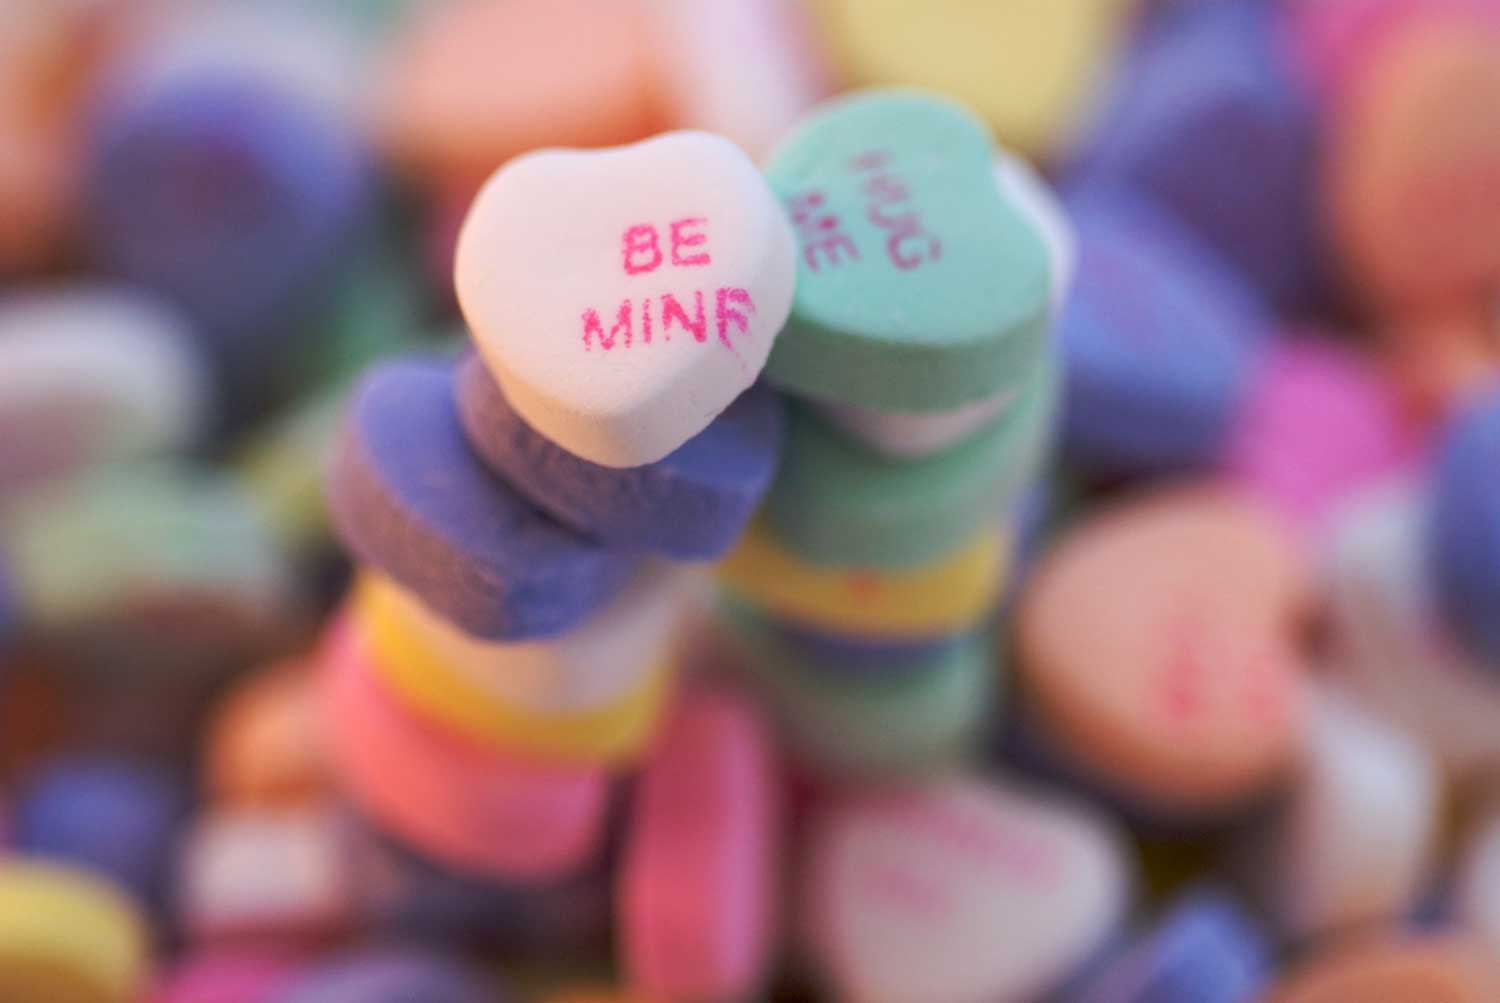 15-02-11-candy-hearts-be-mine